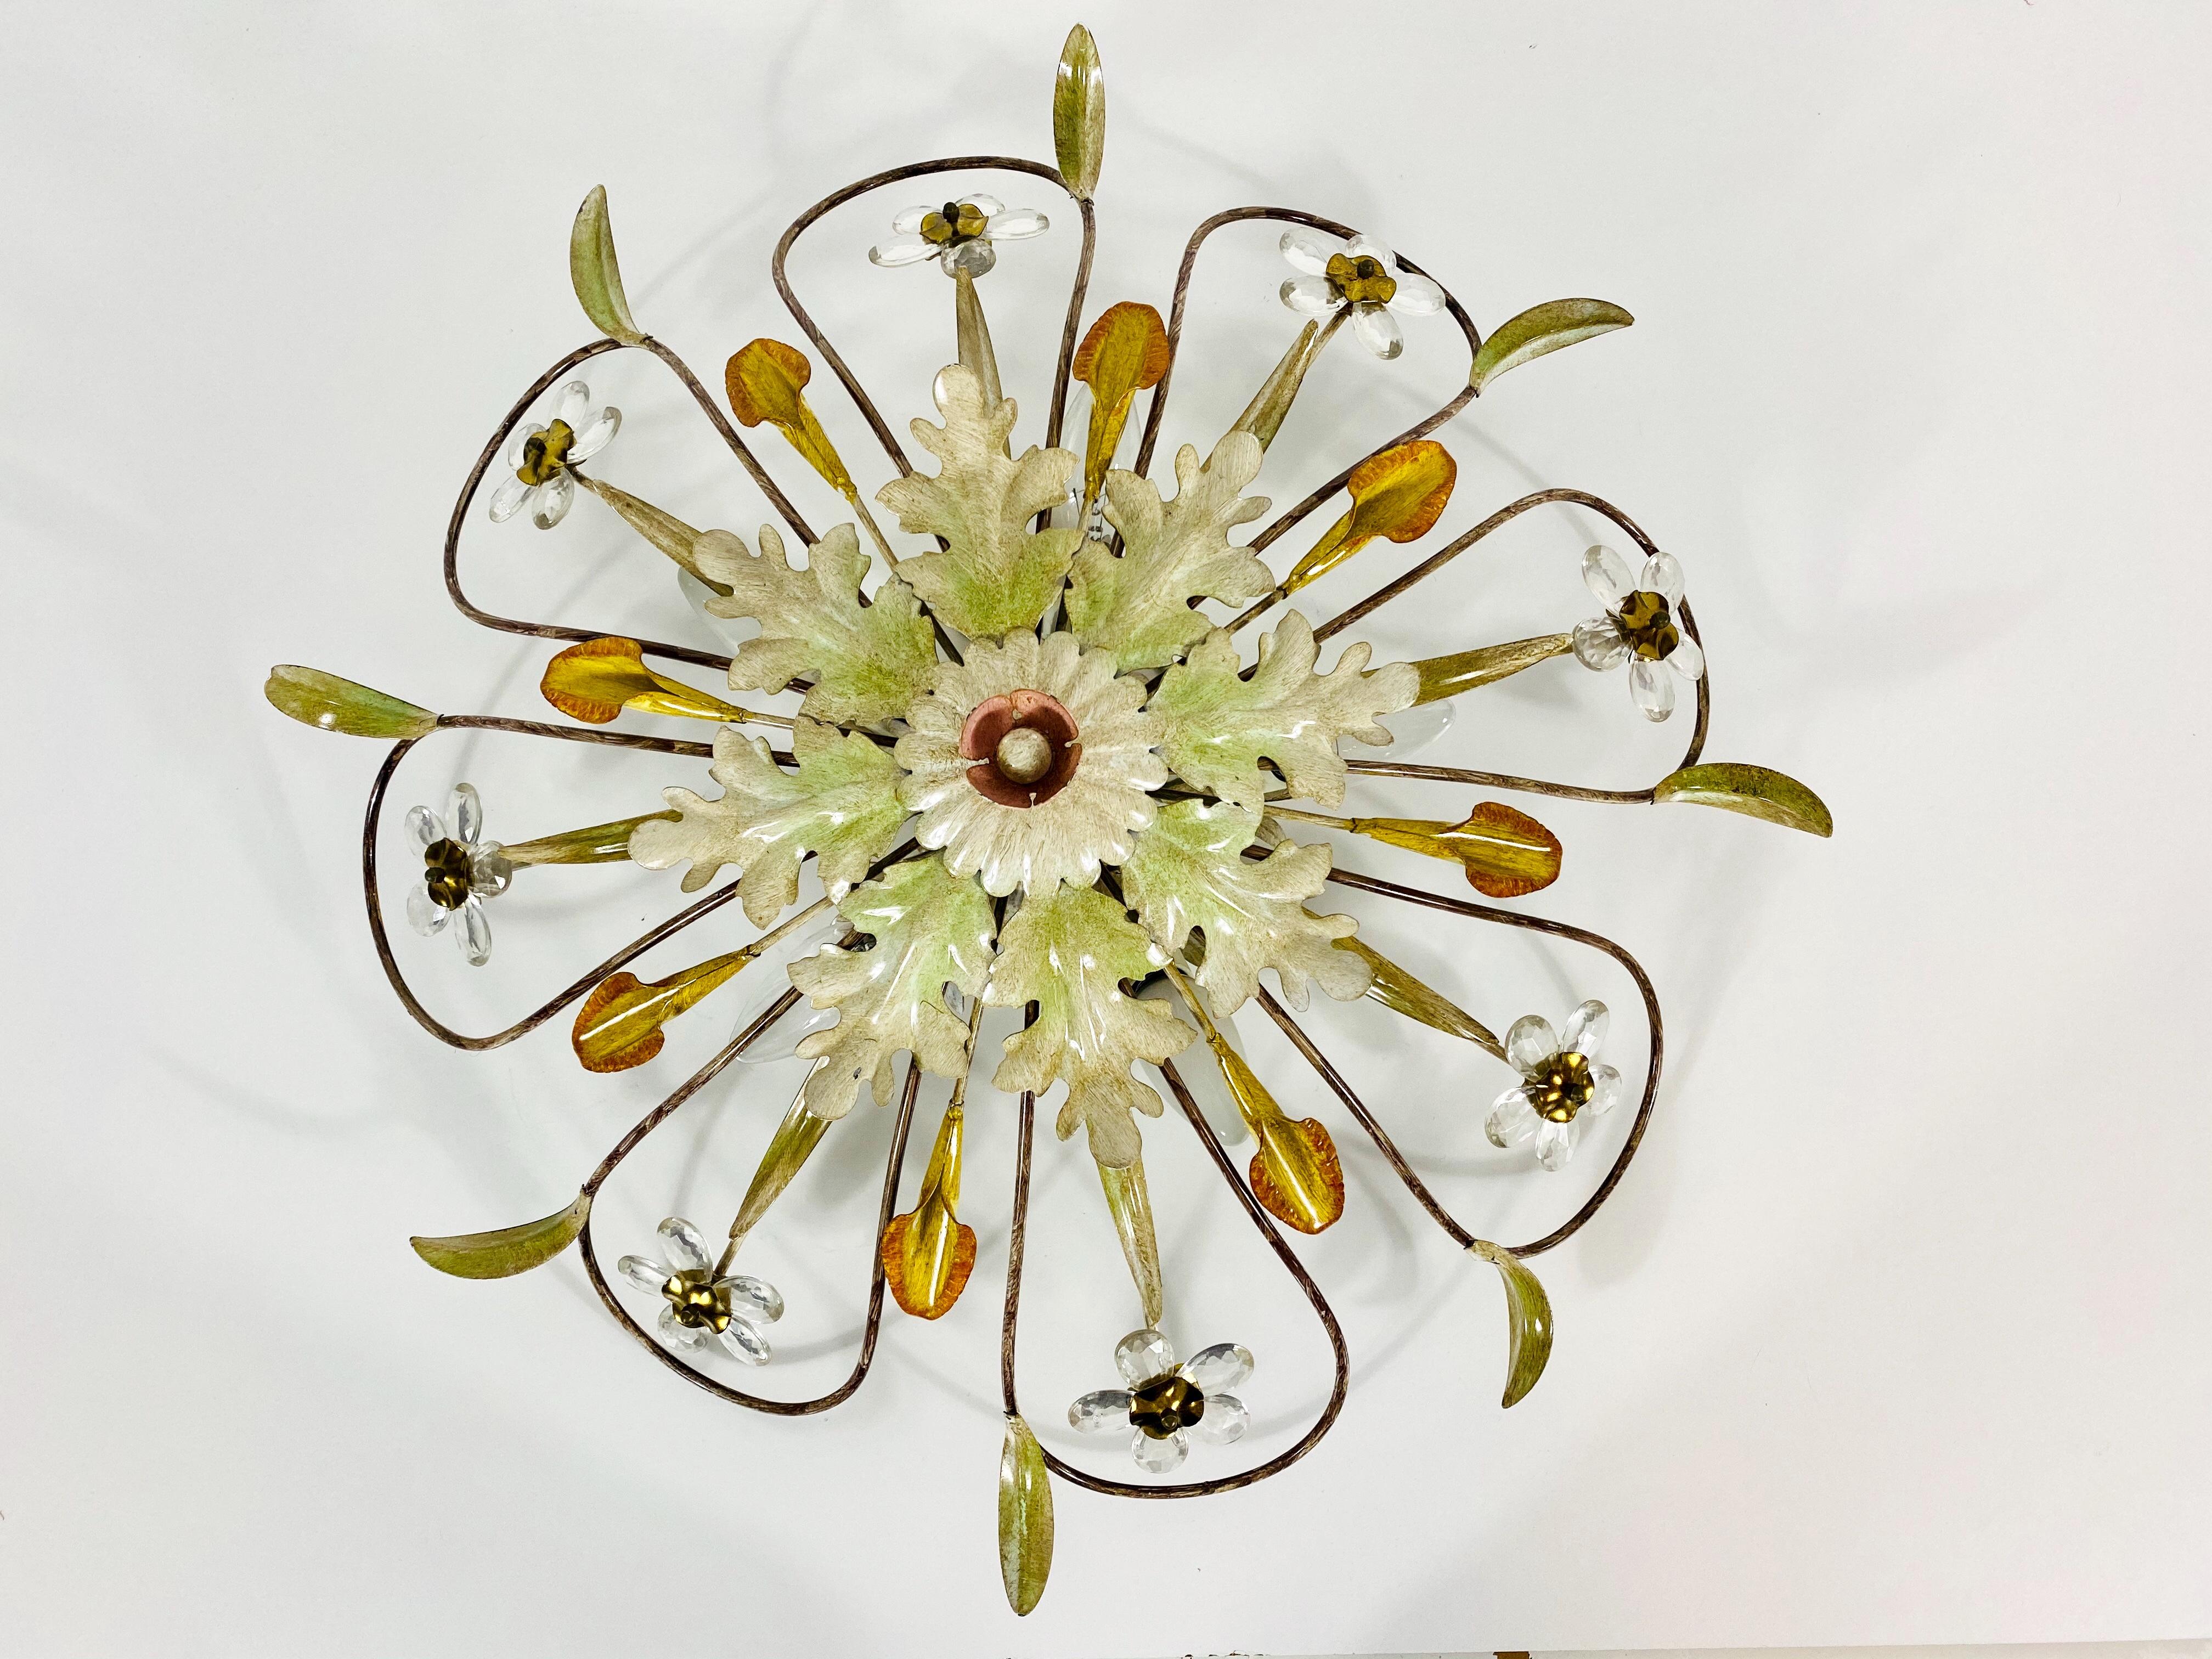 An extraordinary flushmount attributed to Banci made in Italy in the 1950s. The lamp has a beautiful wheat sheaf design. It is made in the period of Hollywood Regency. The leafs are made of Murano glass.

The light requires E14 light bulbs. Very